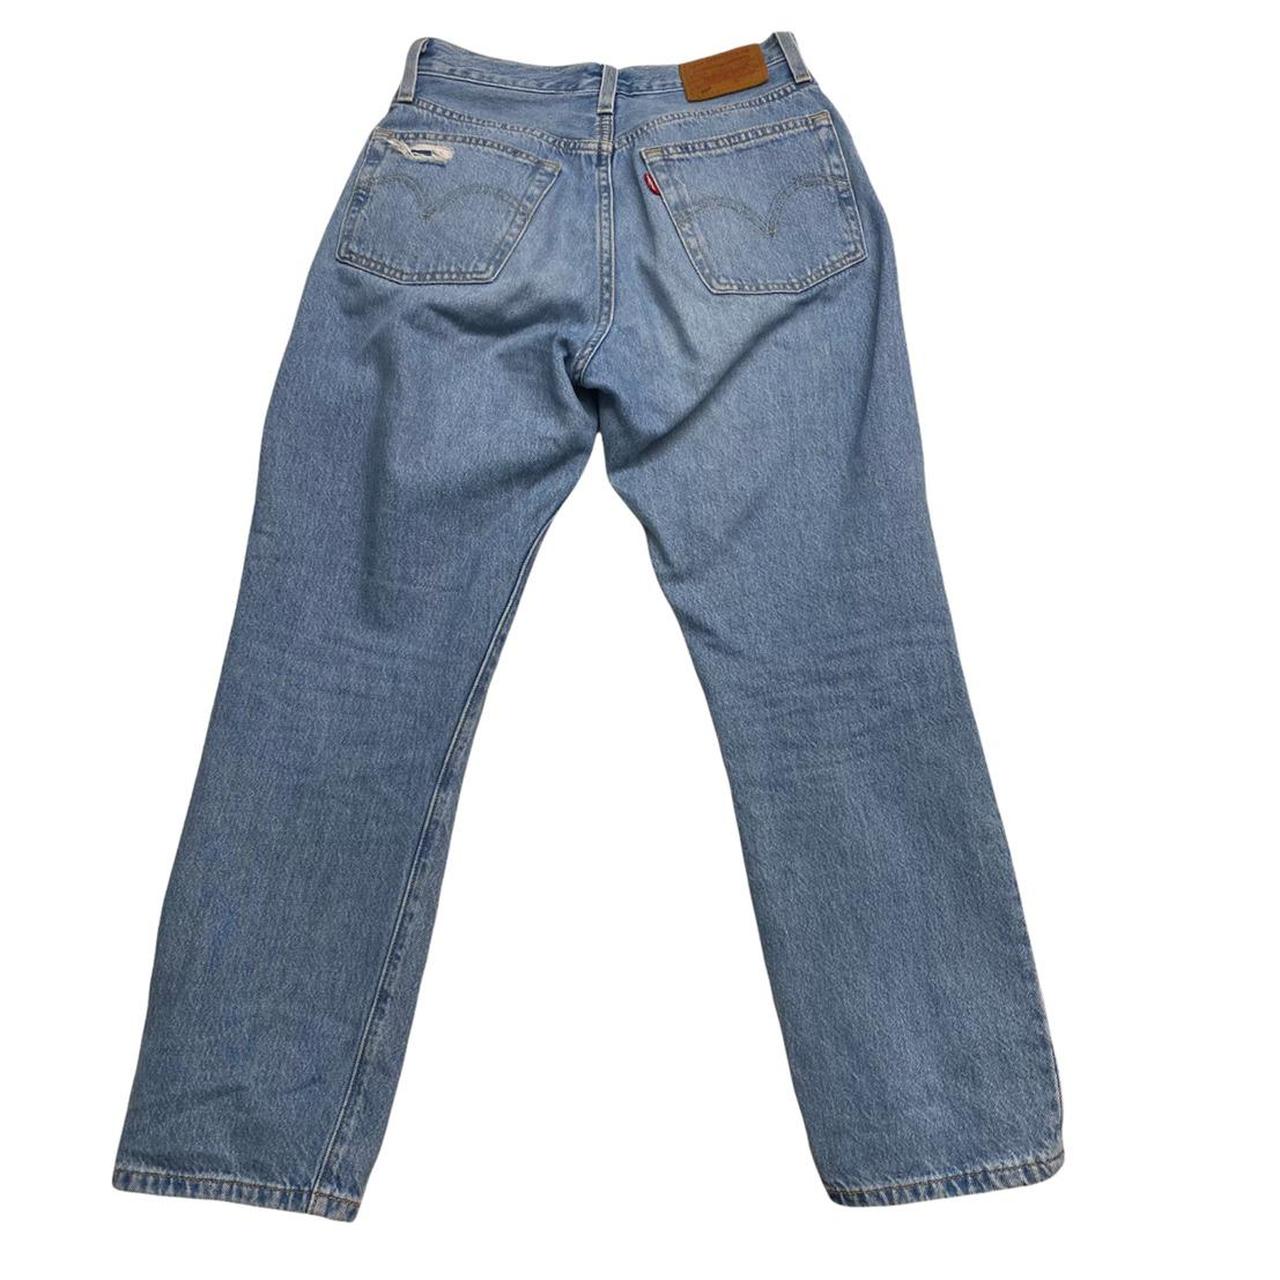 Product Image 3 - Levi’s 501 straight leg ripped